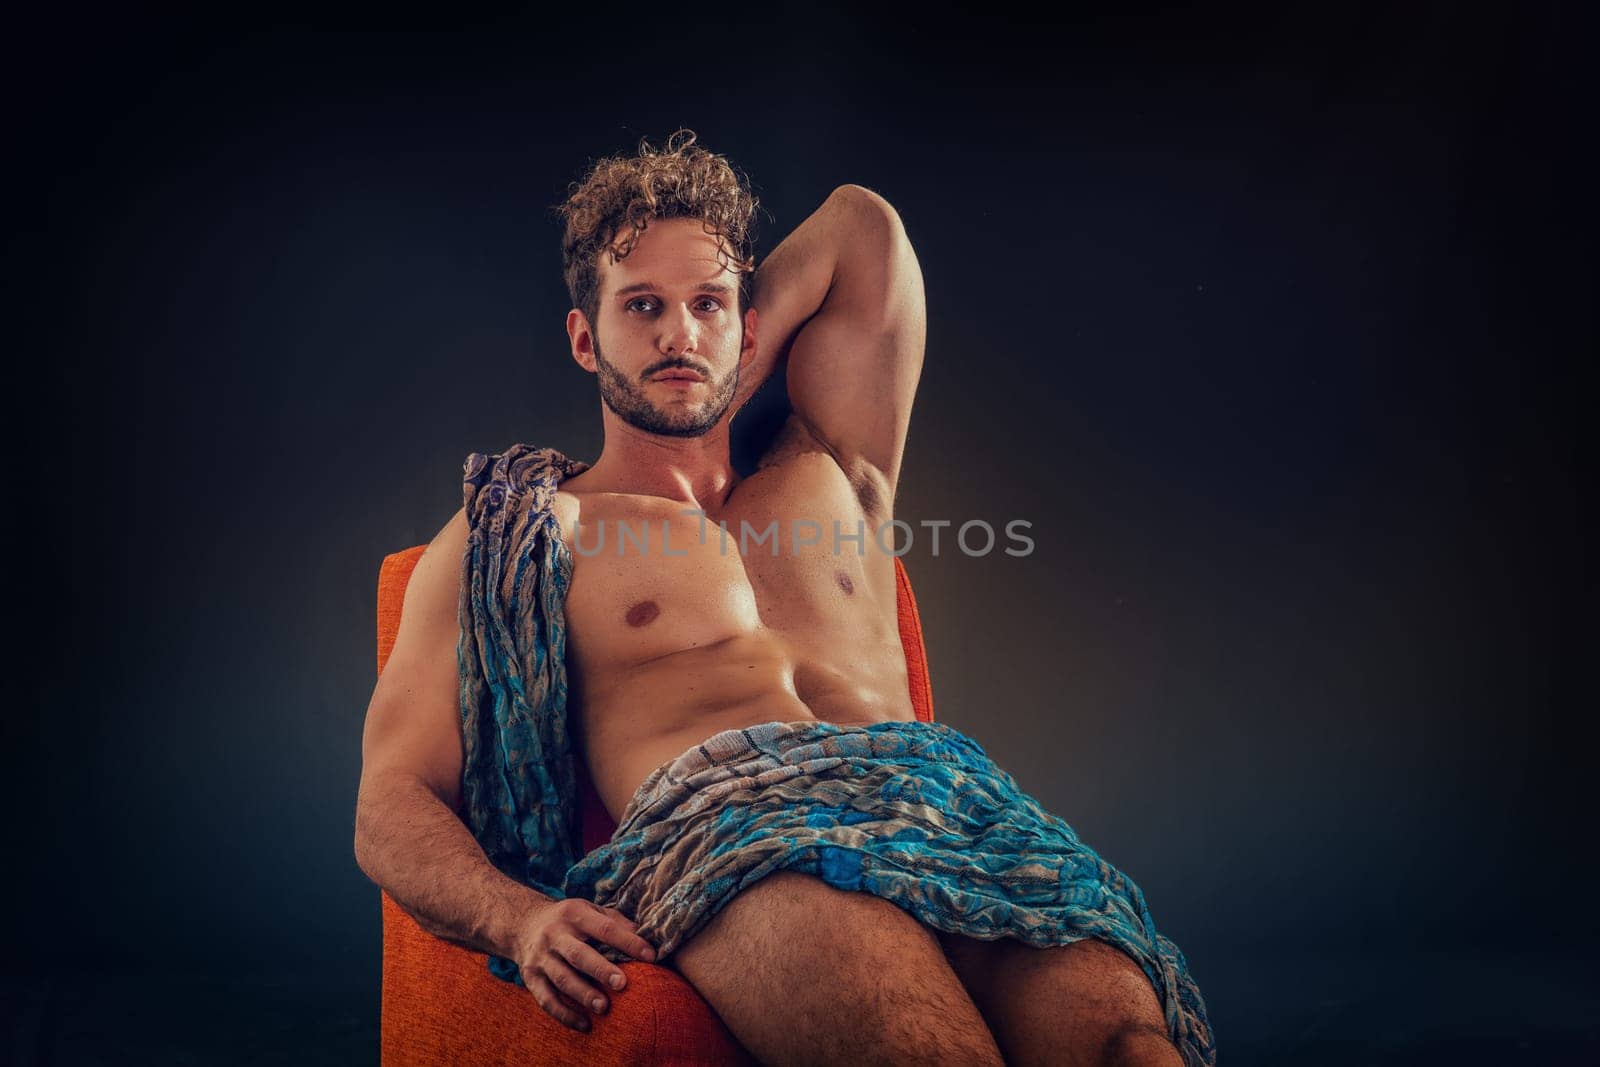 A man with a towel wrapped around his body sitting on a chair